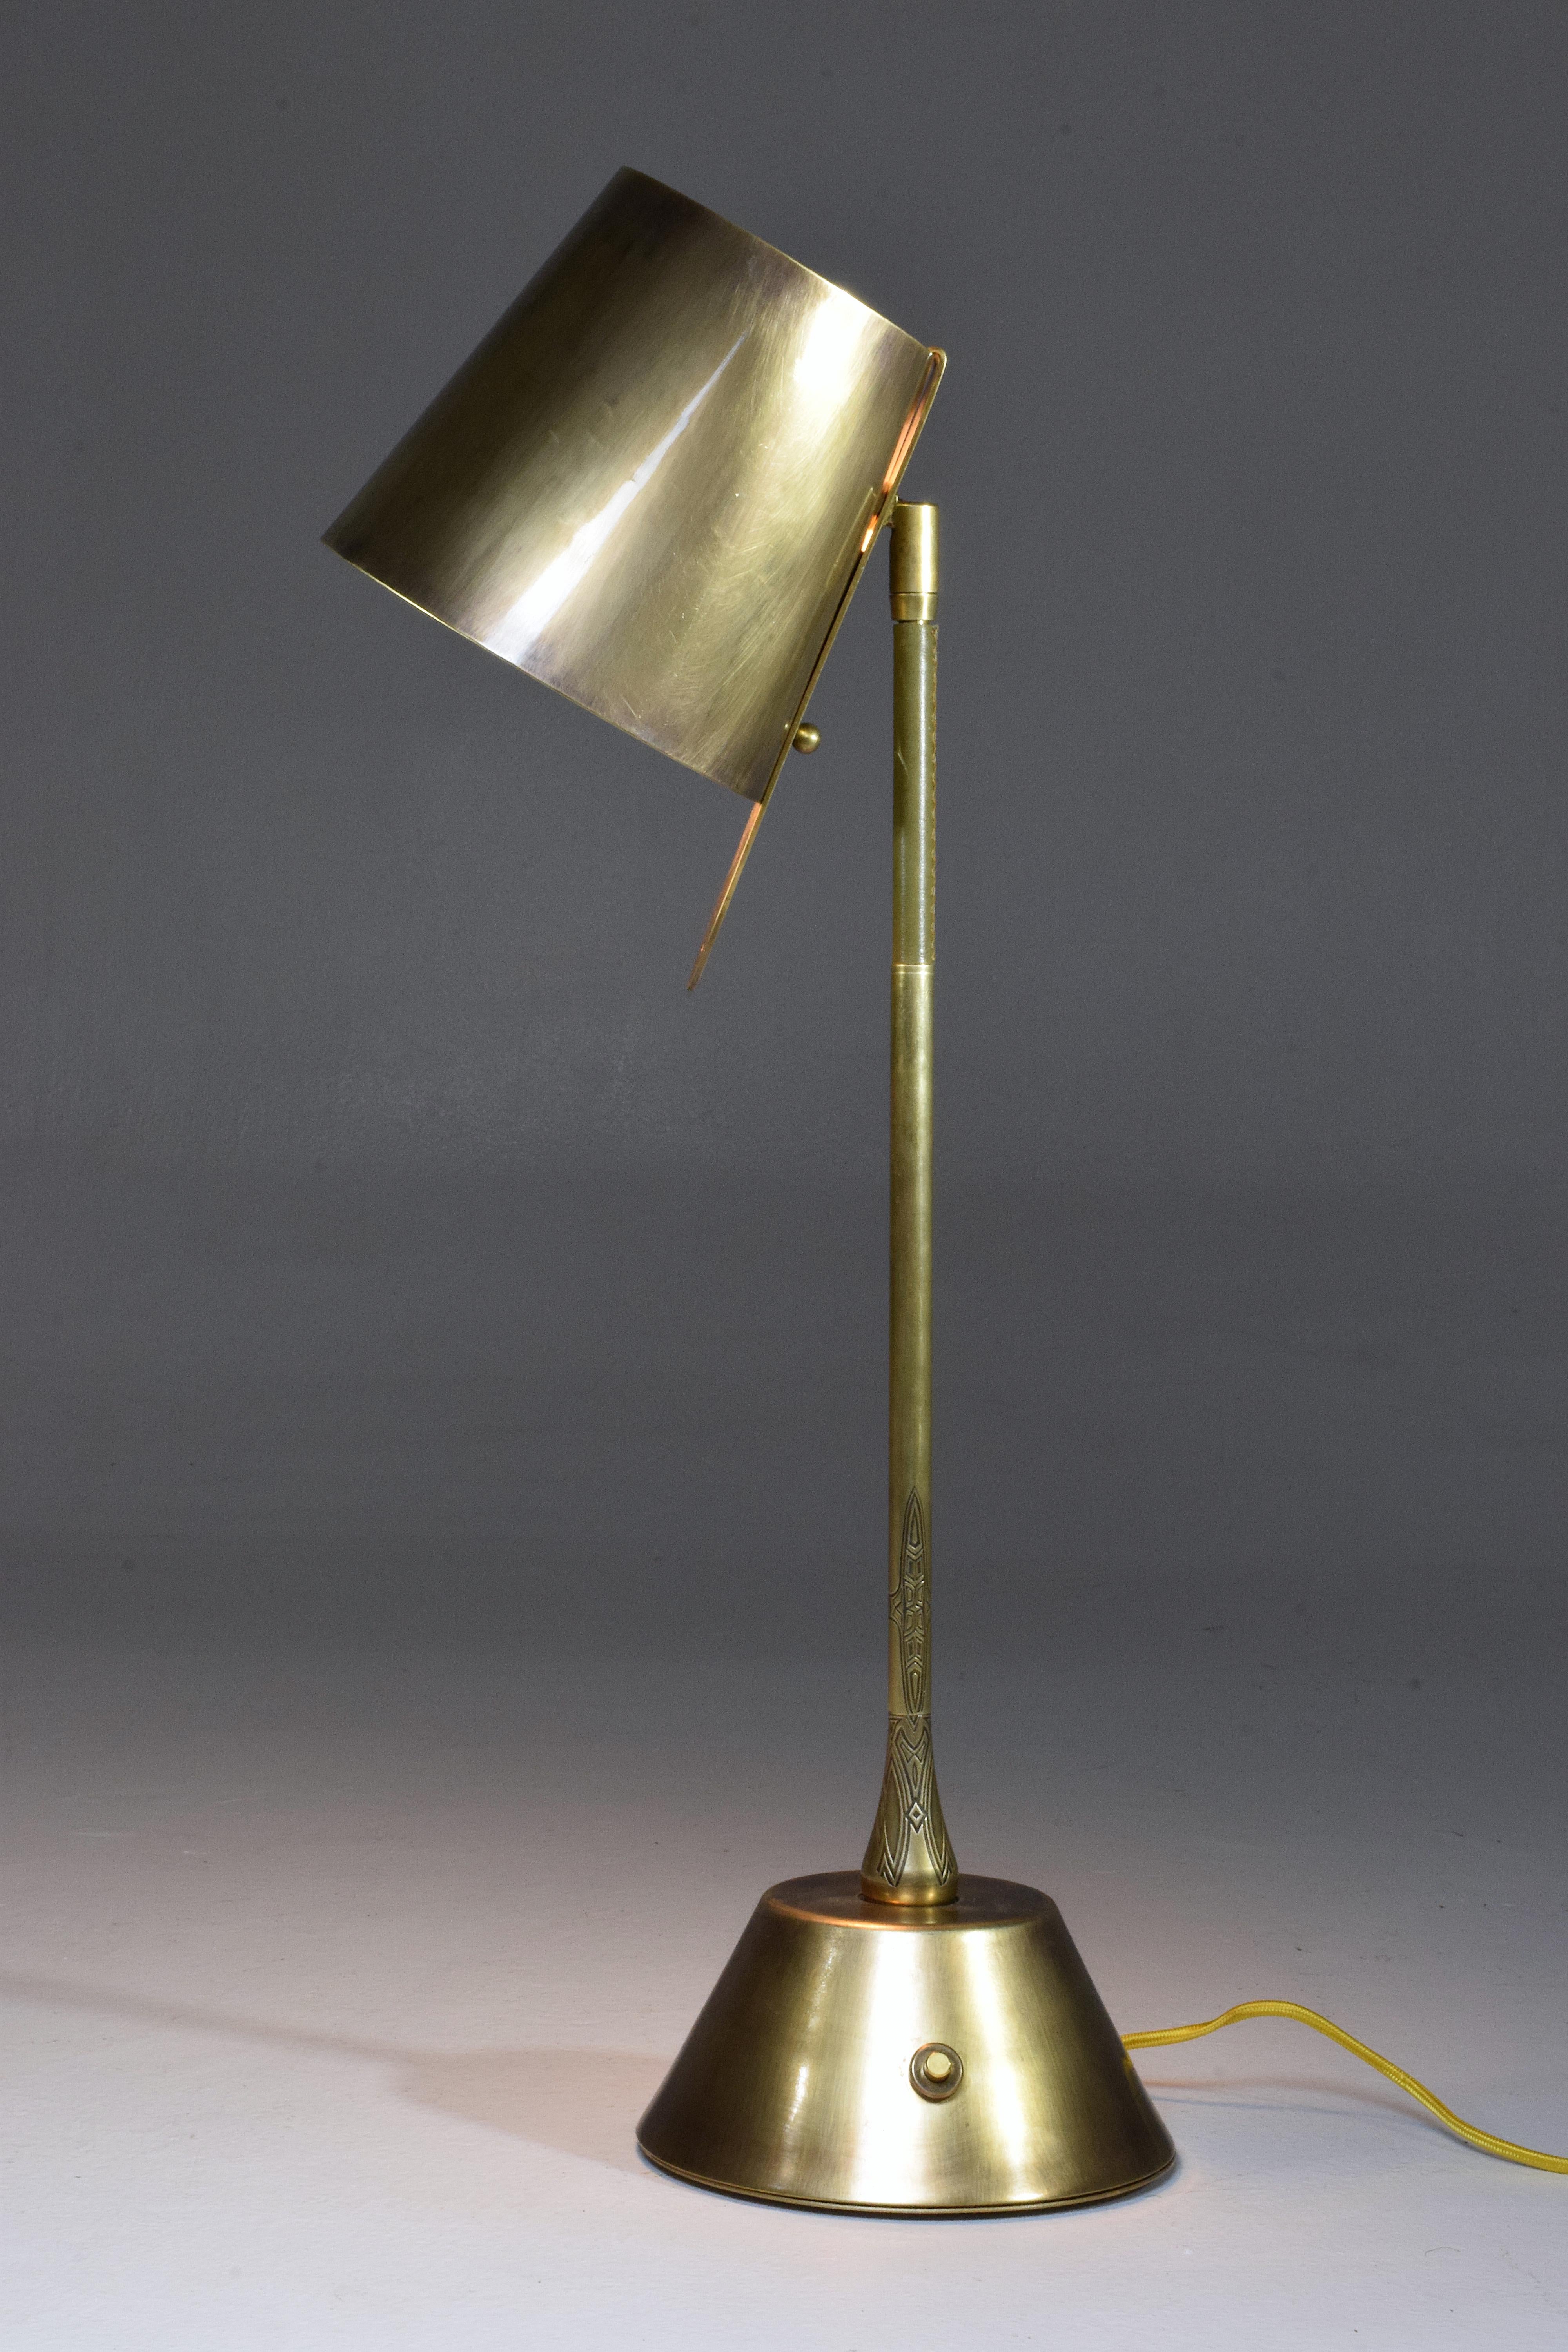 Contemporary handcrafted articulating table lamp of considerable size pictured in a solid polished aged brass finish, adorned with a brown hand-sewn sheathed leather detail and designed with our signature pear shaped joint. The shade is built with a